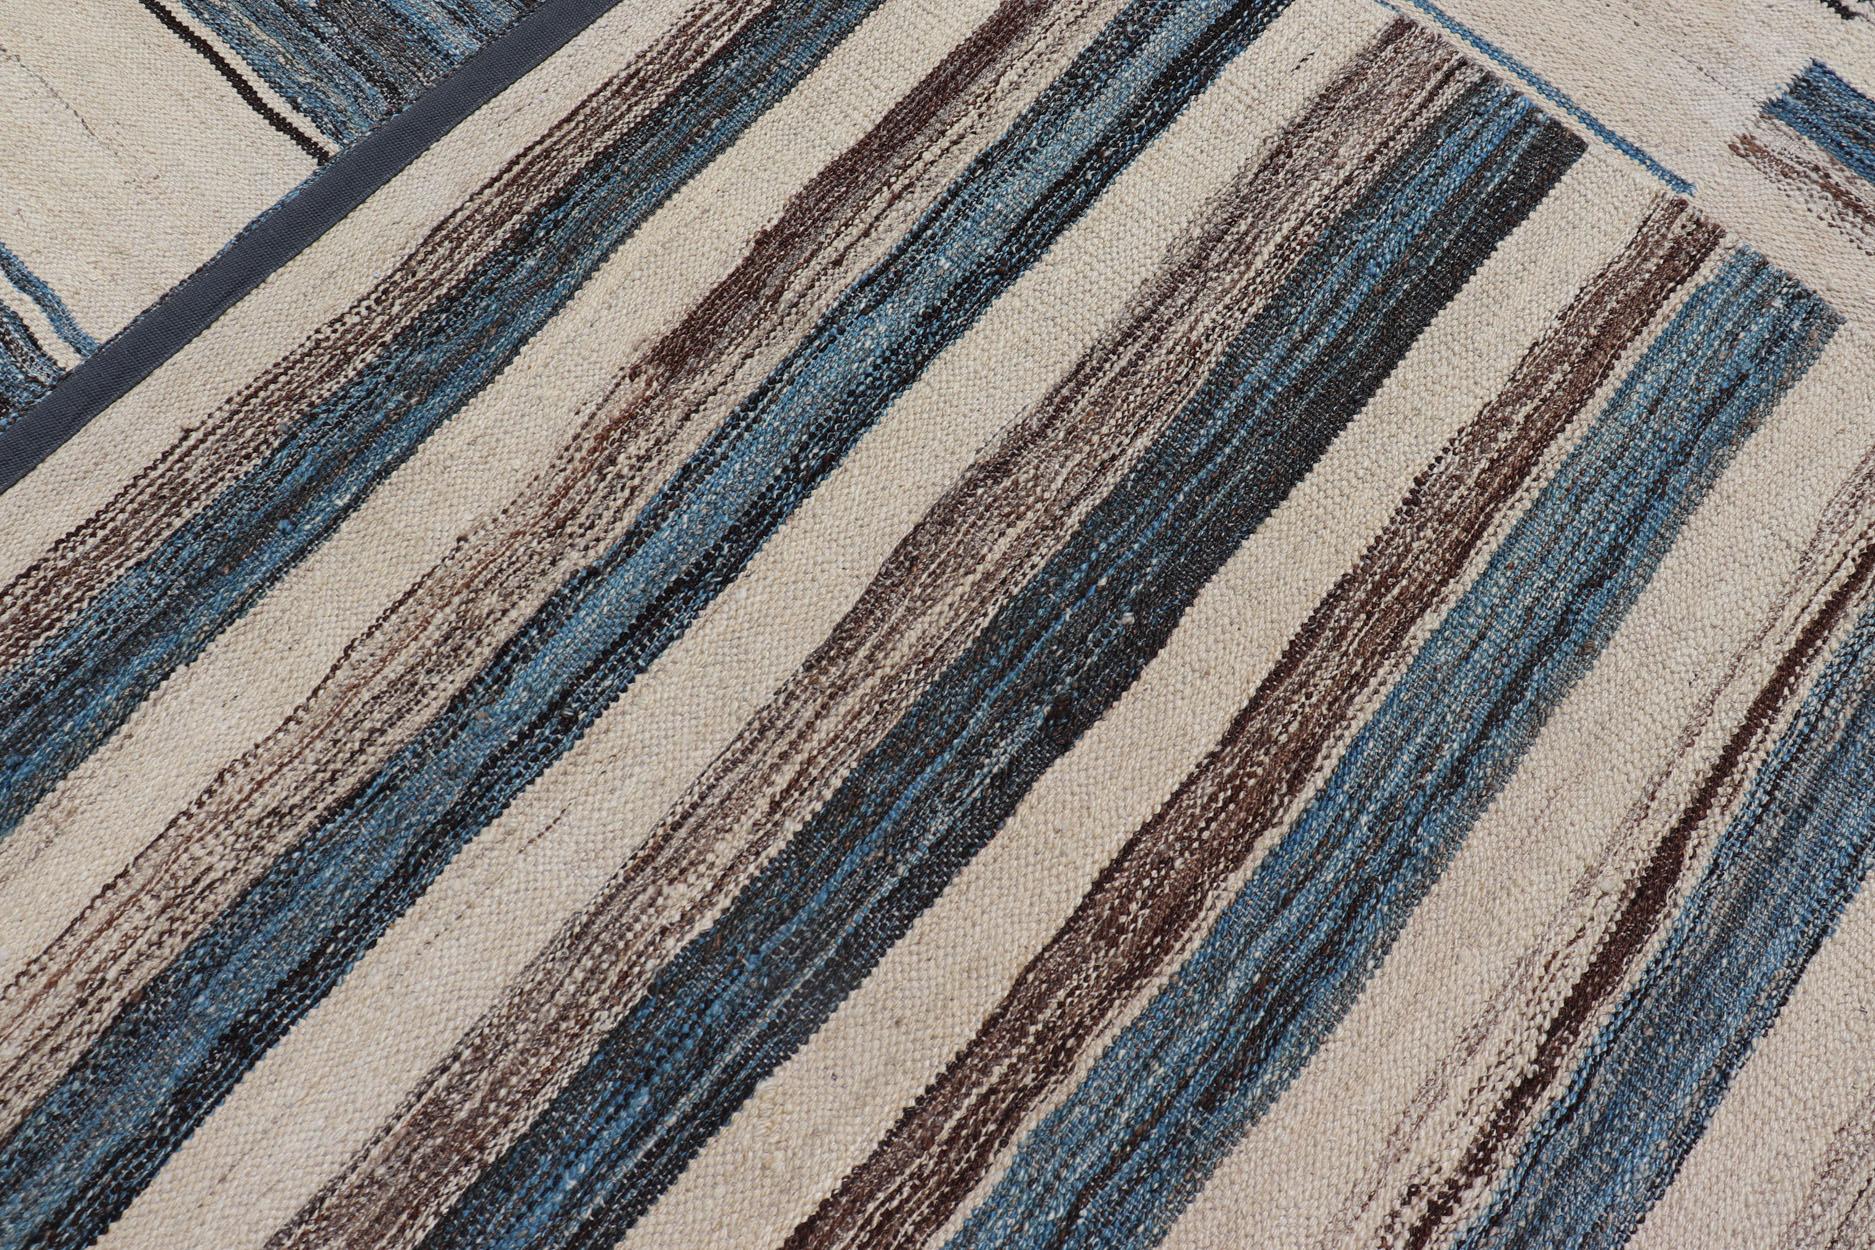 Sqaure Flat-Weave Kilim Rug with Classic Stripe Design in Blue, Cream, Brown For Sale 3